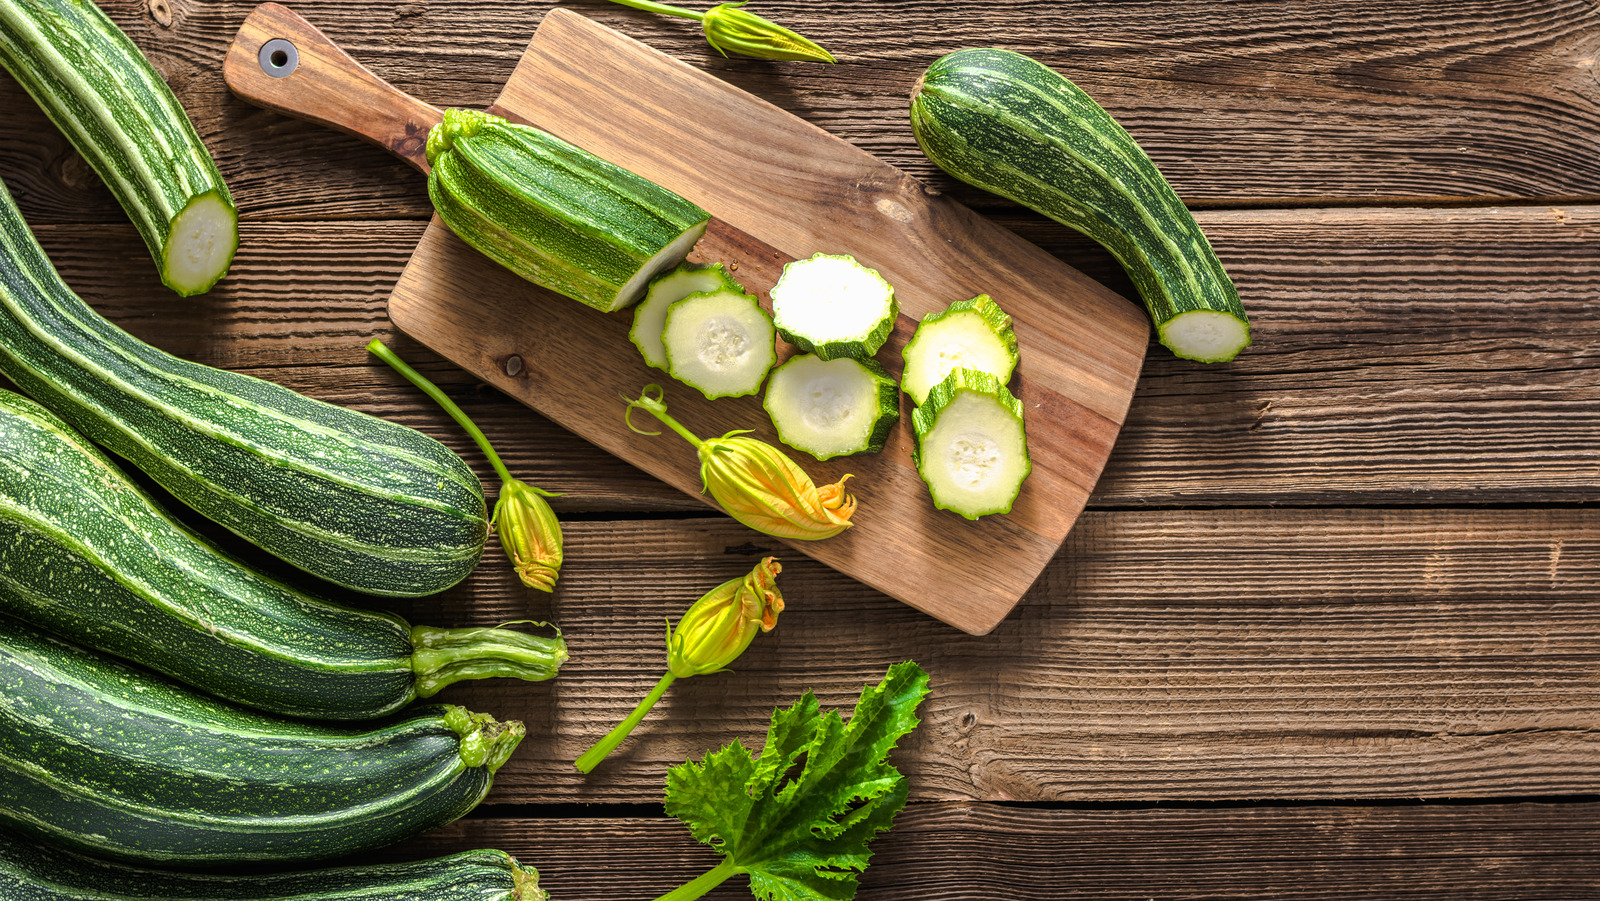 What Is Zucchini And What Does It Taste Like?